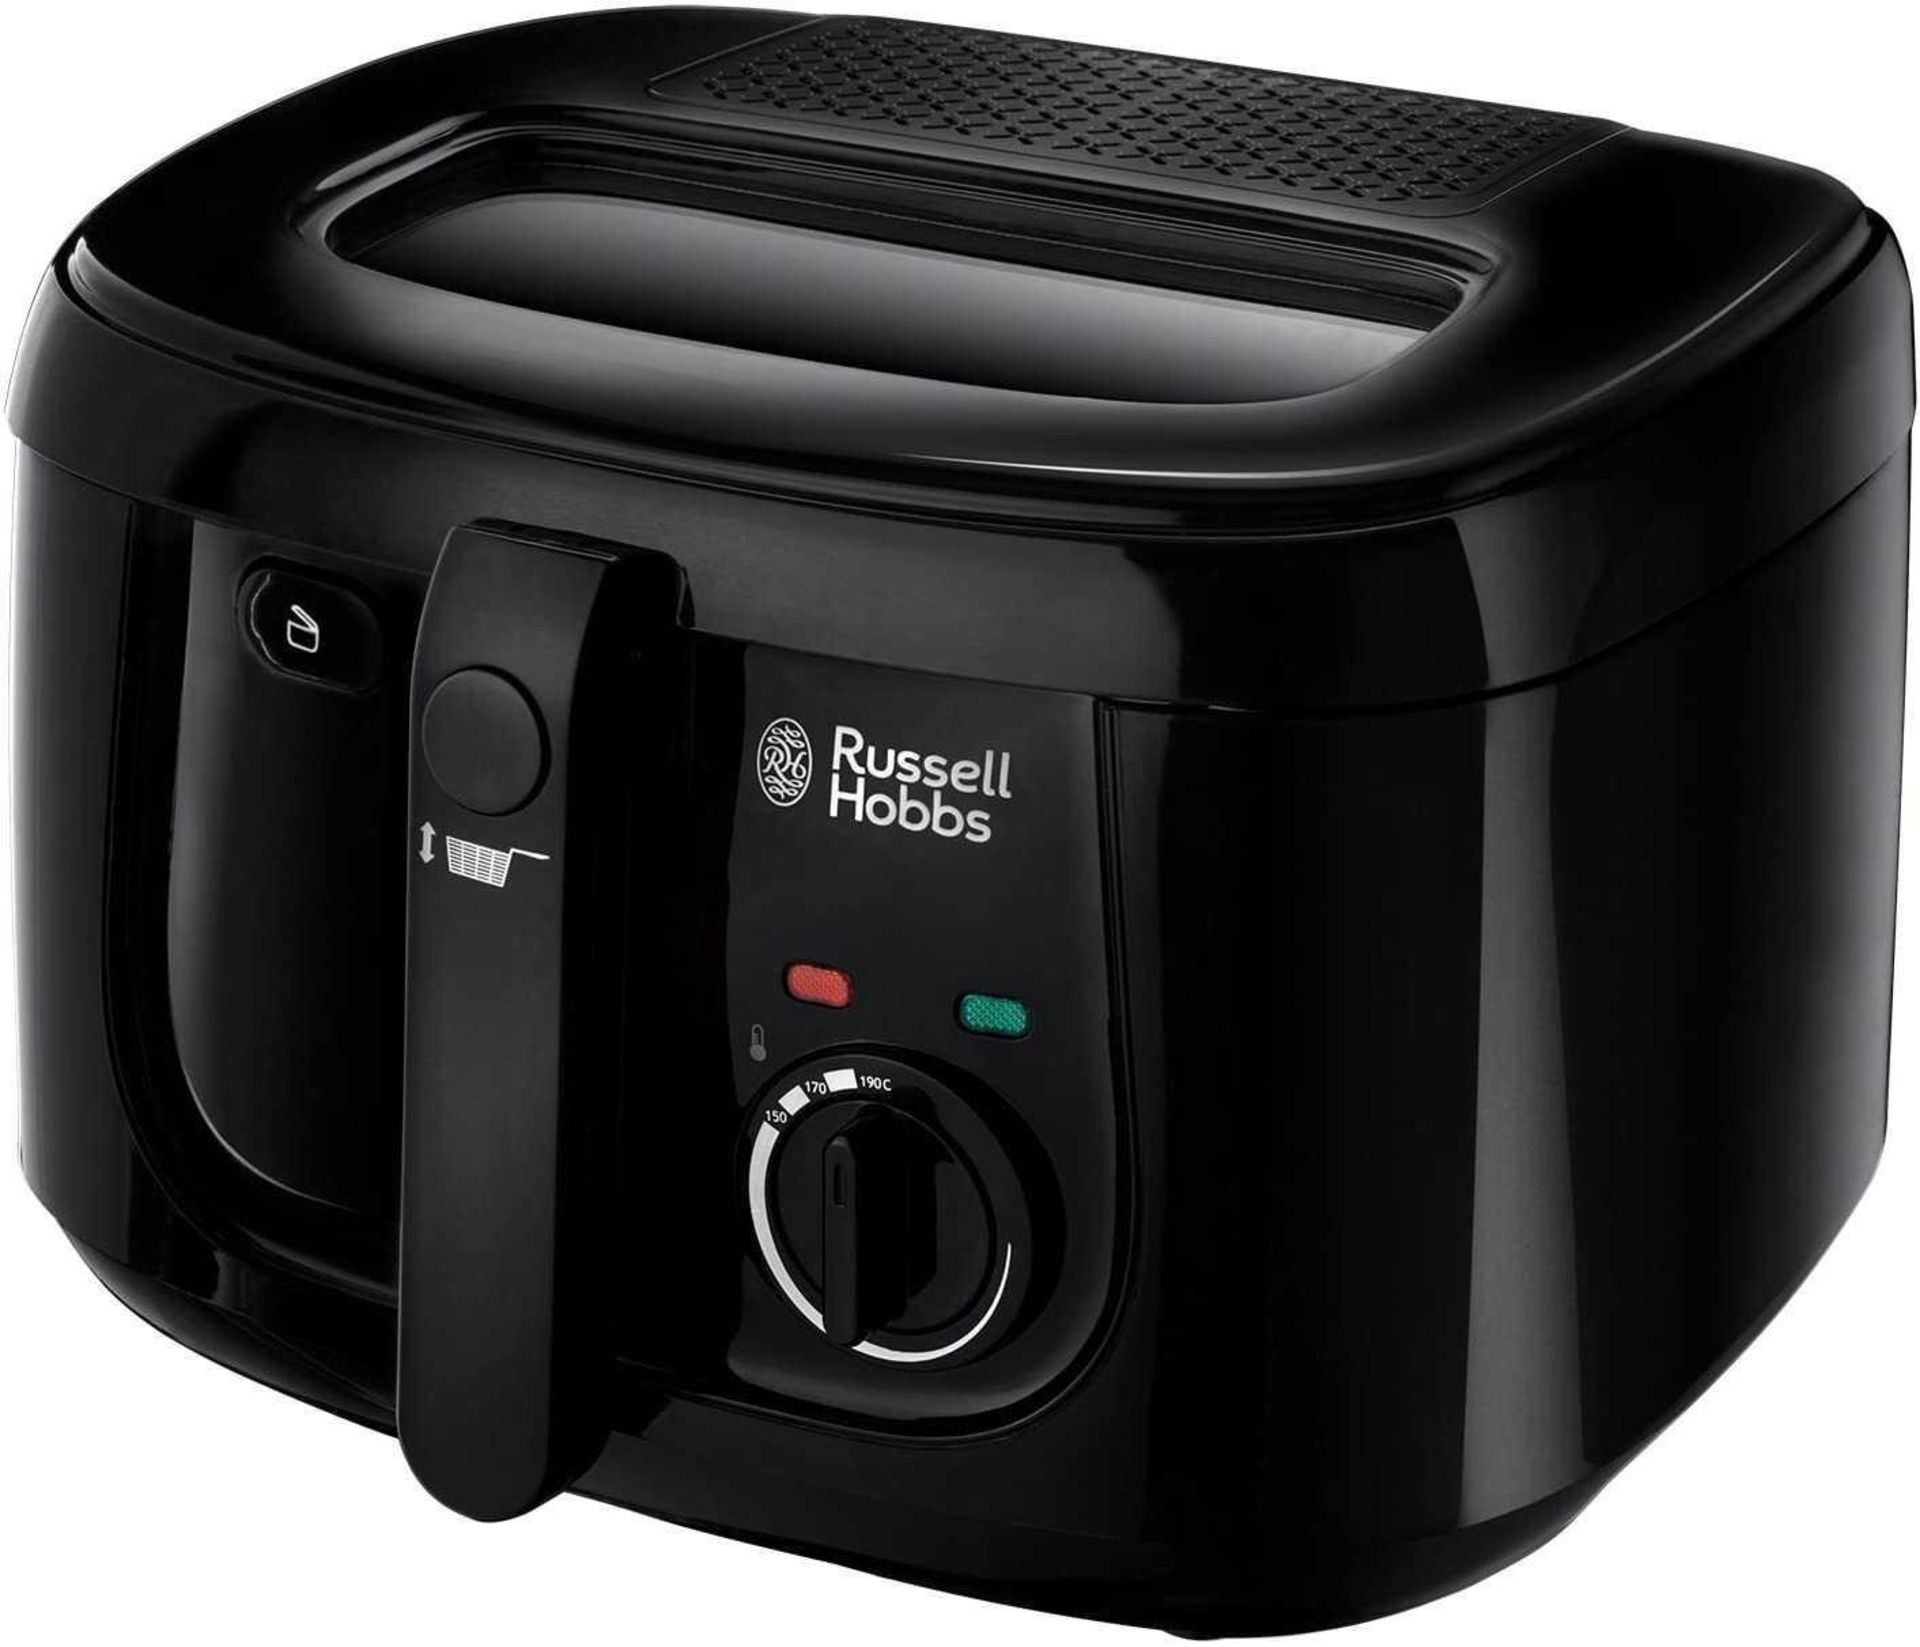 Combined RRP £100 Lot To Contain 3 Russell Hobbs Food Collection Deep Fryers In Black With 2.5L Capa - Image 2 of 2